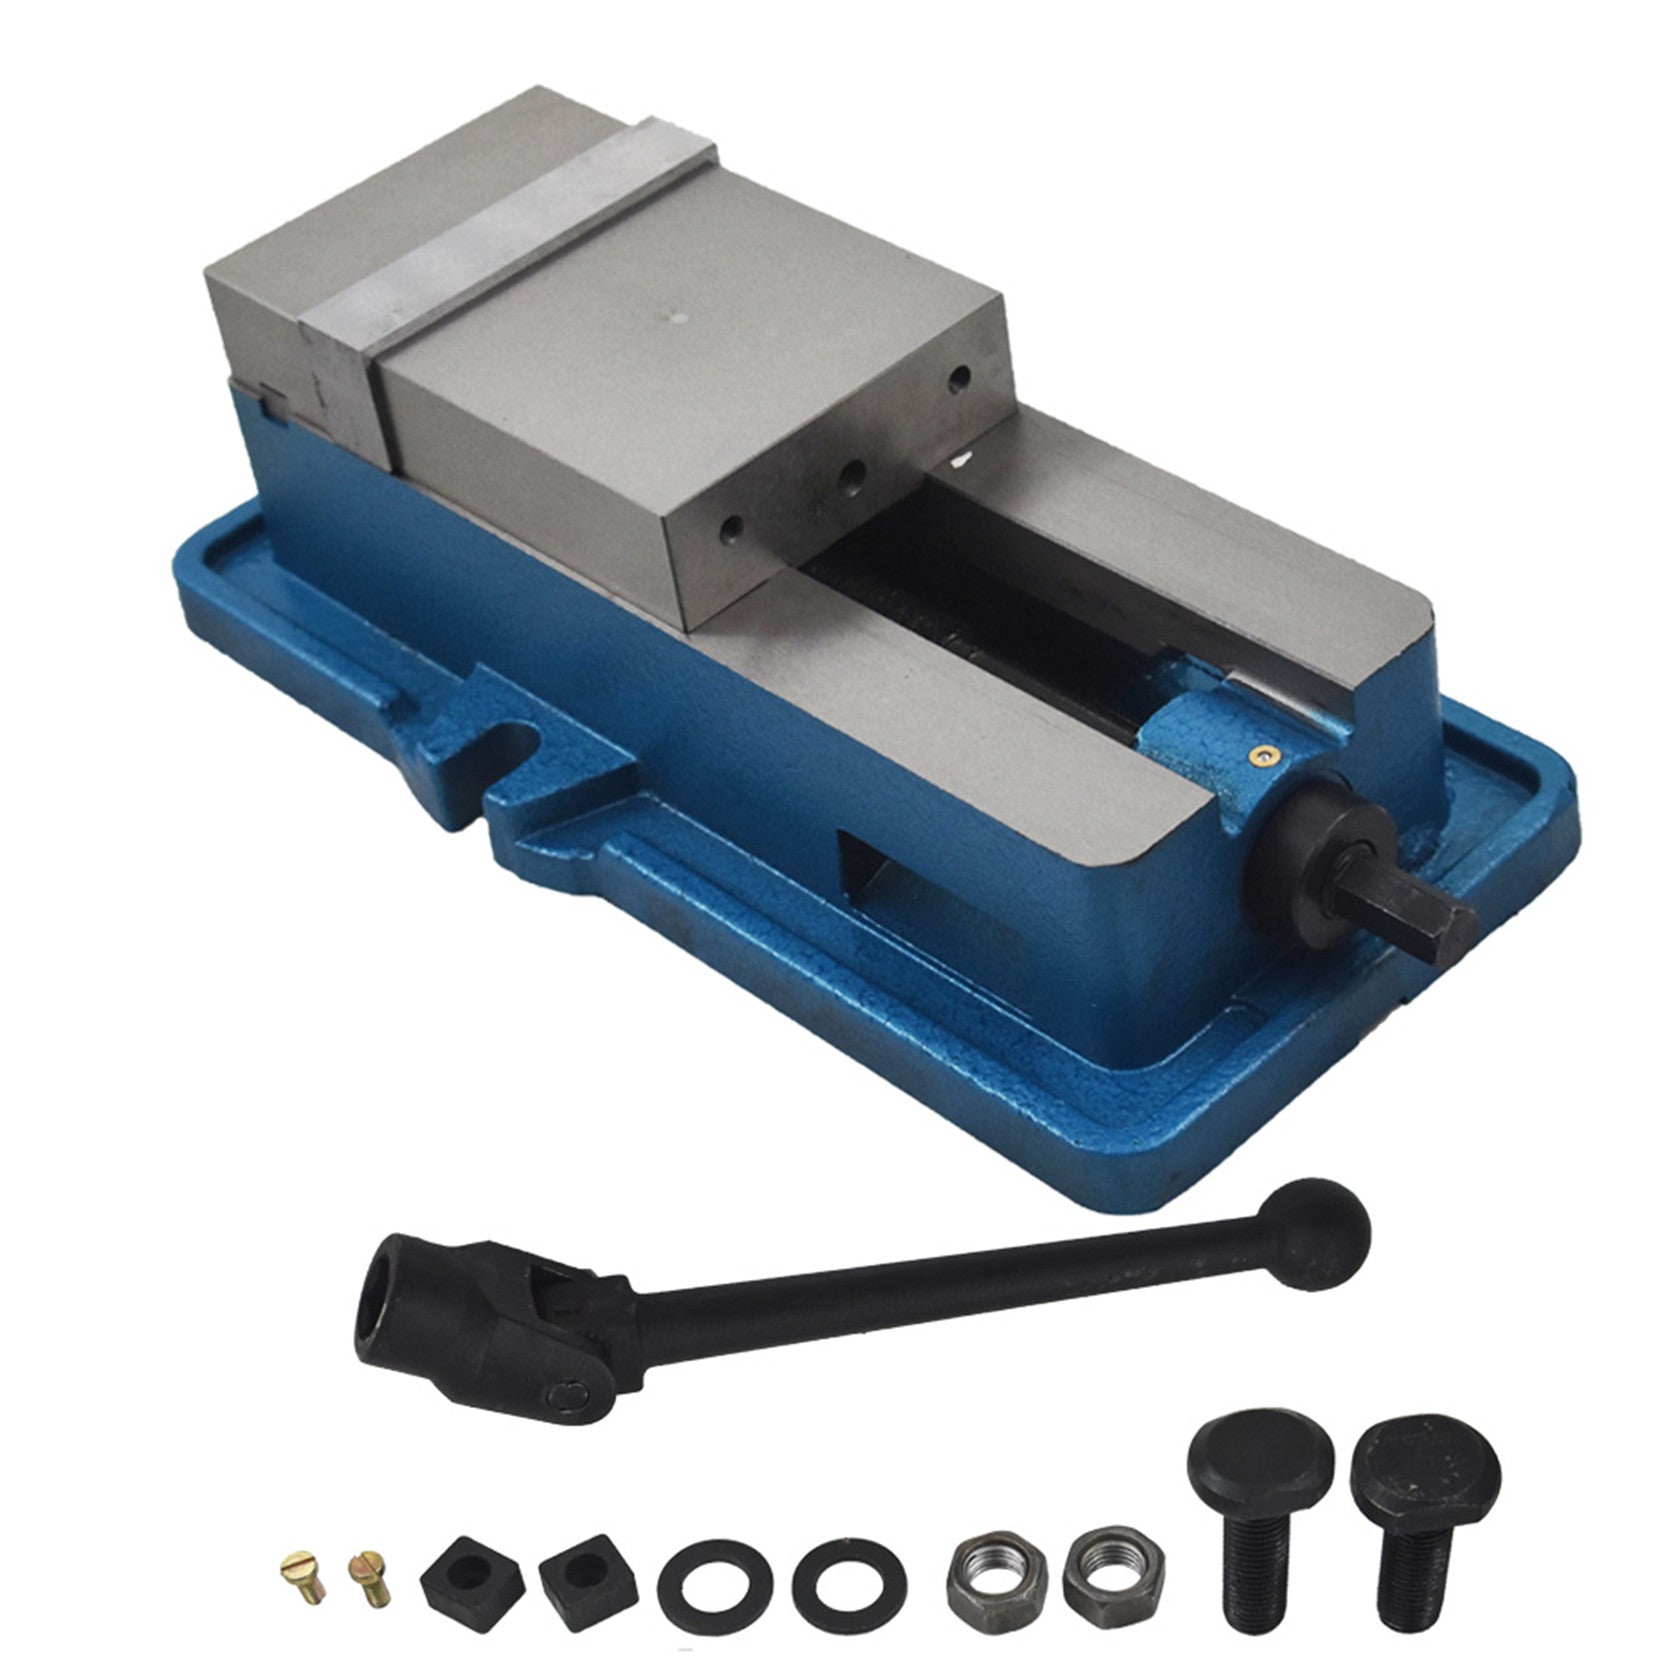 findmall 4 Inch Lock Down Vise Precision Milling Vise 4 Inch Jaw Width Drill Press Vise Milling Drilling Machine Bench Clamp Clamping Vice(4") FINDMALLPARTS